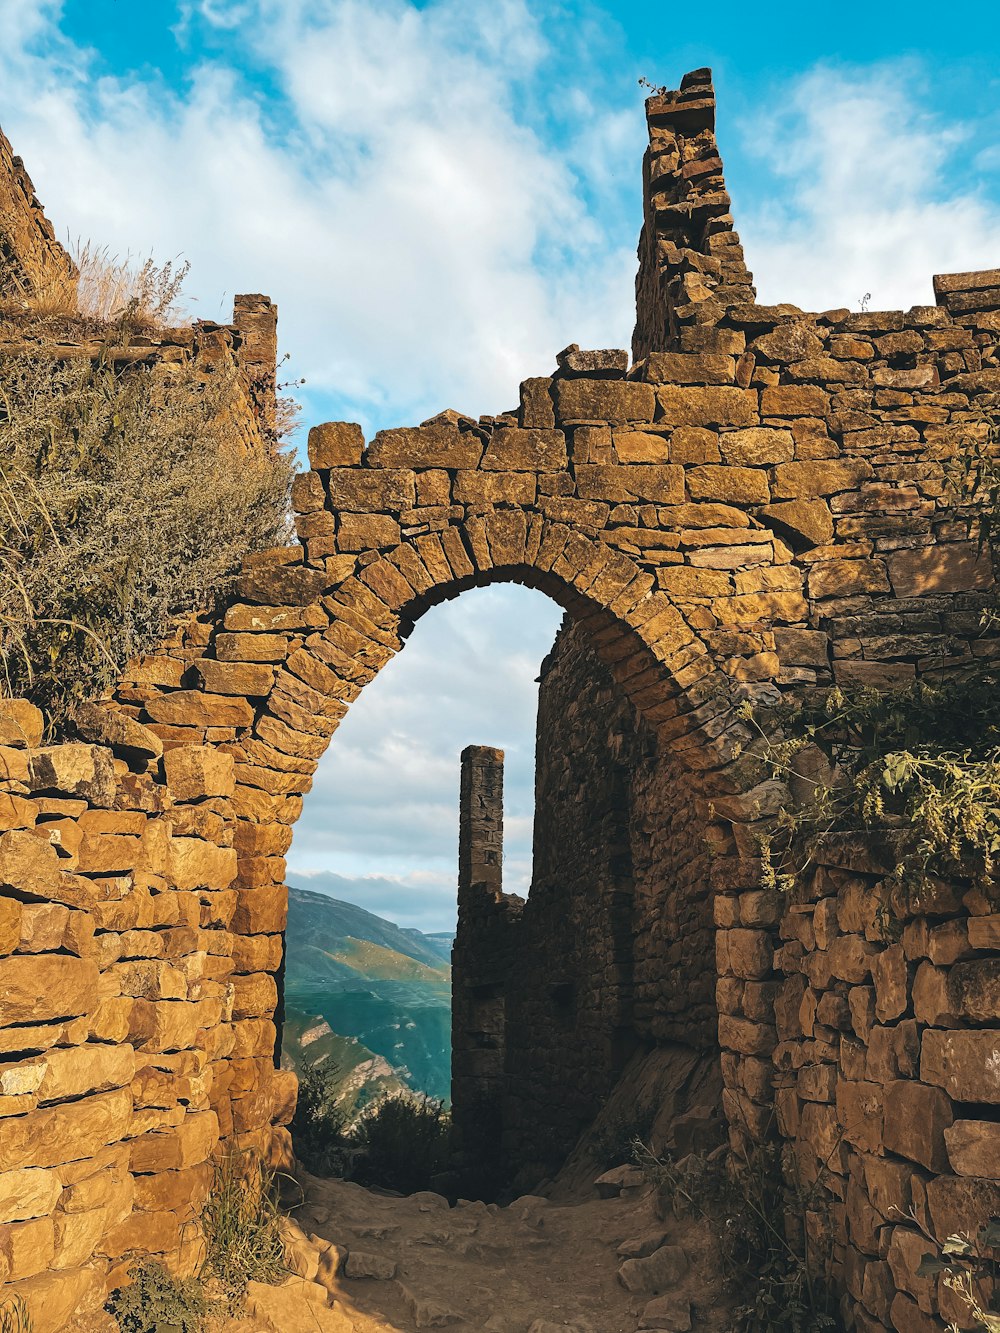 a stone archway with a tower